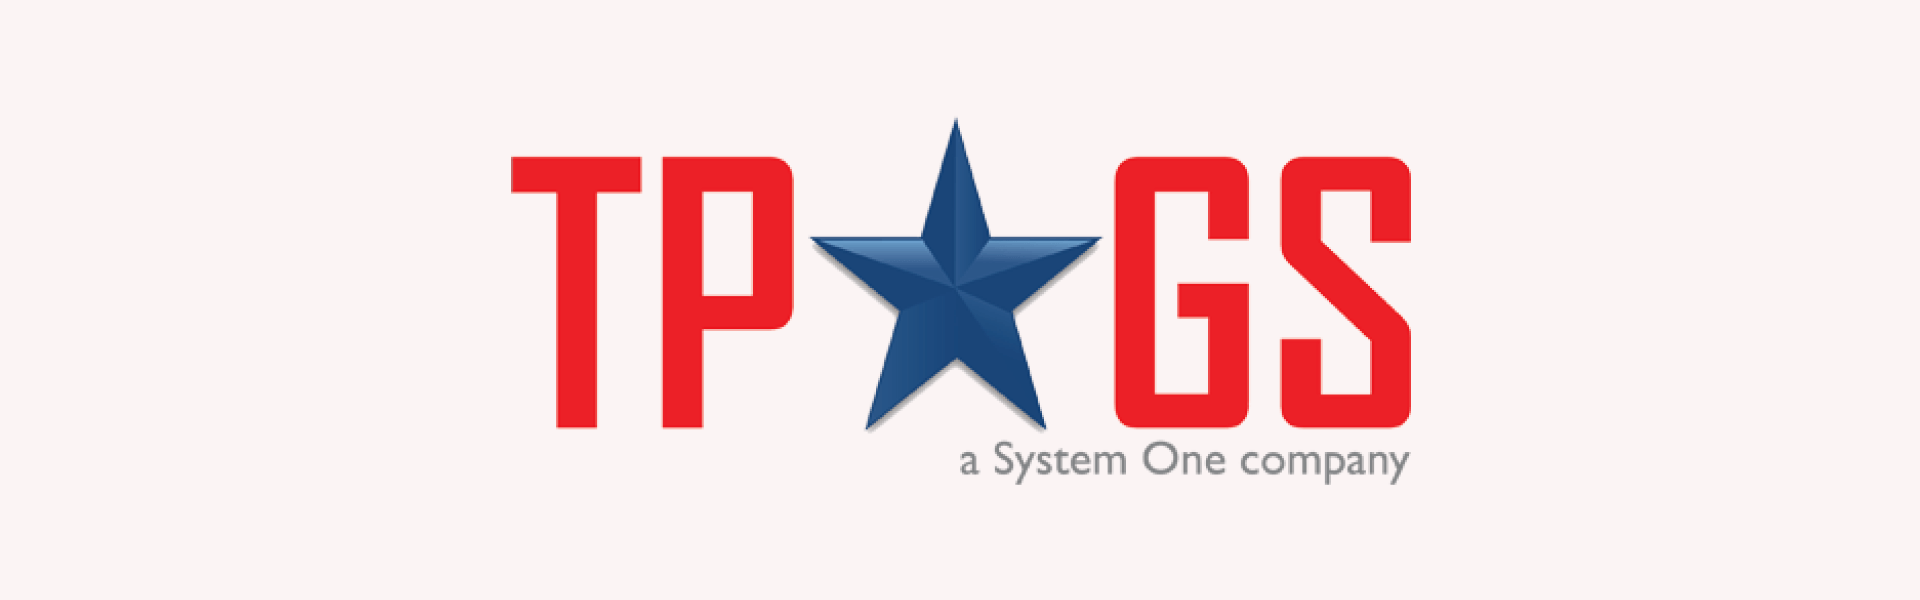 System One Completes Acquisition of Government Contractor TPGS